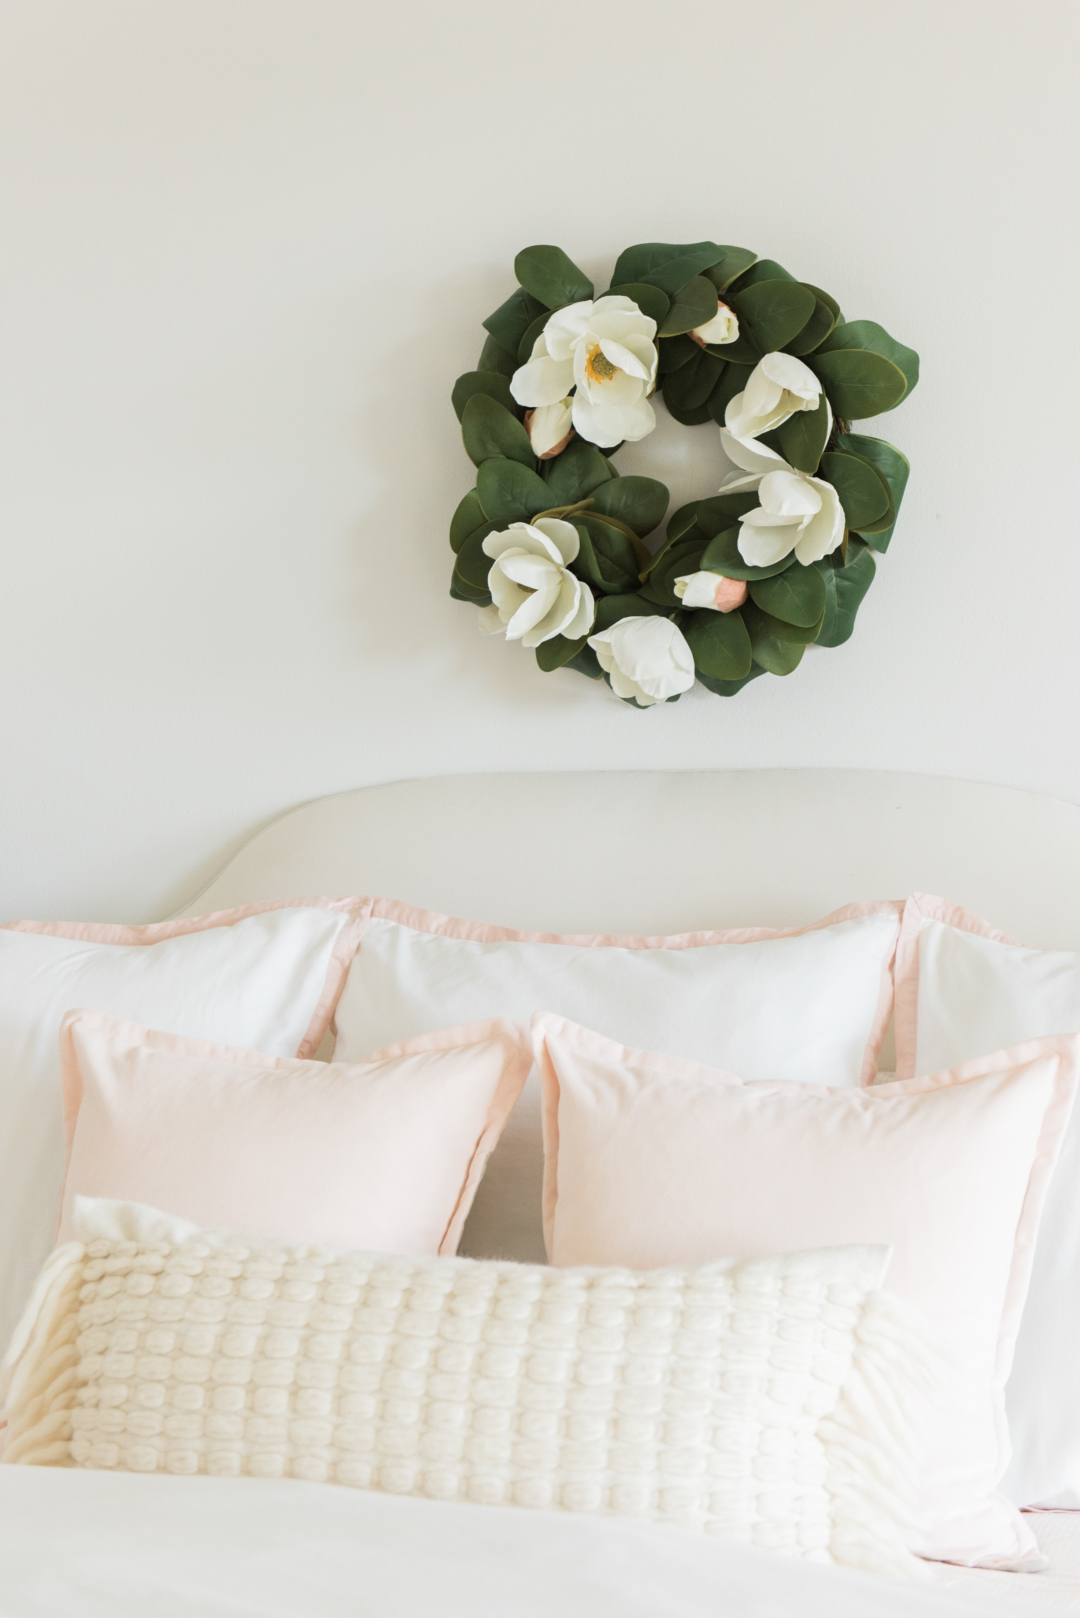 Home: Palm Beach Lately and Serena & Lily Blush Bedding